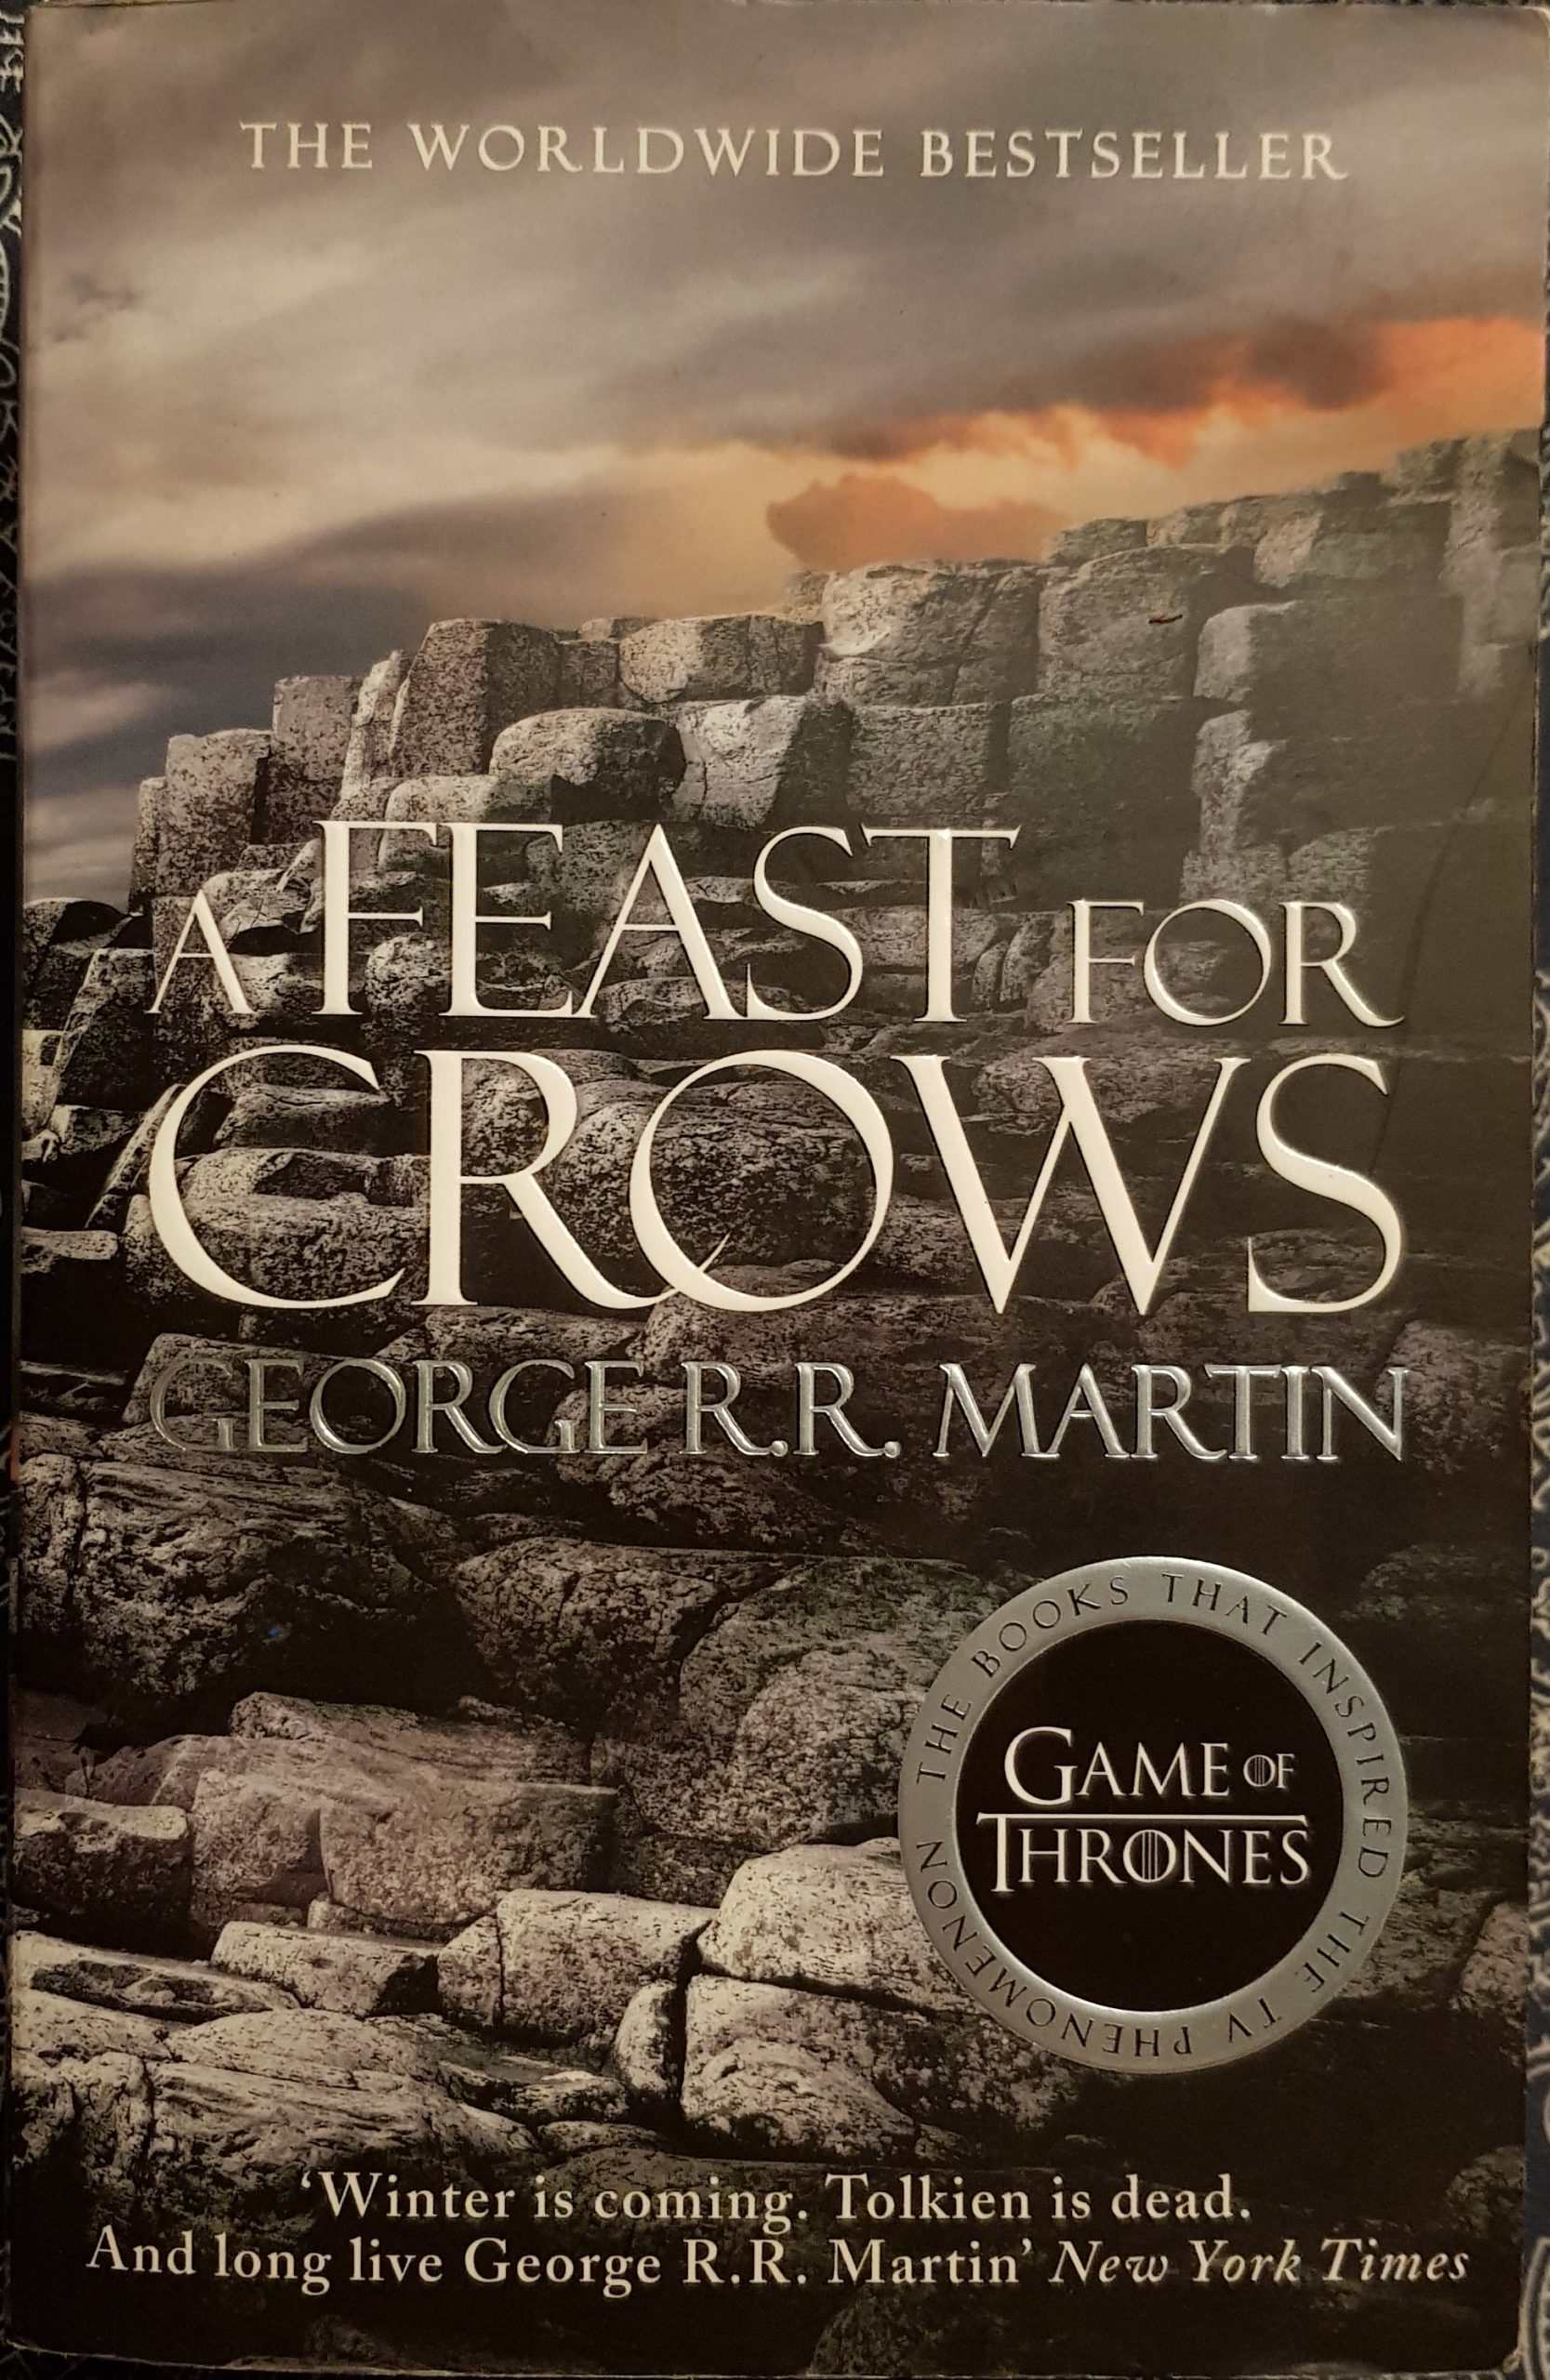 A feast for crows - game of thrones